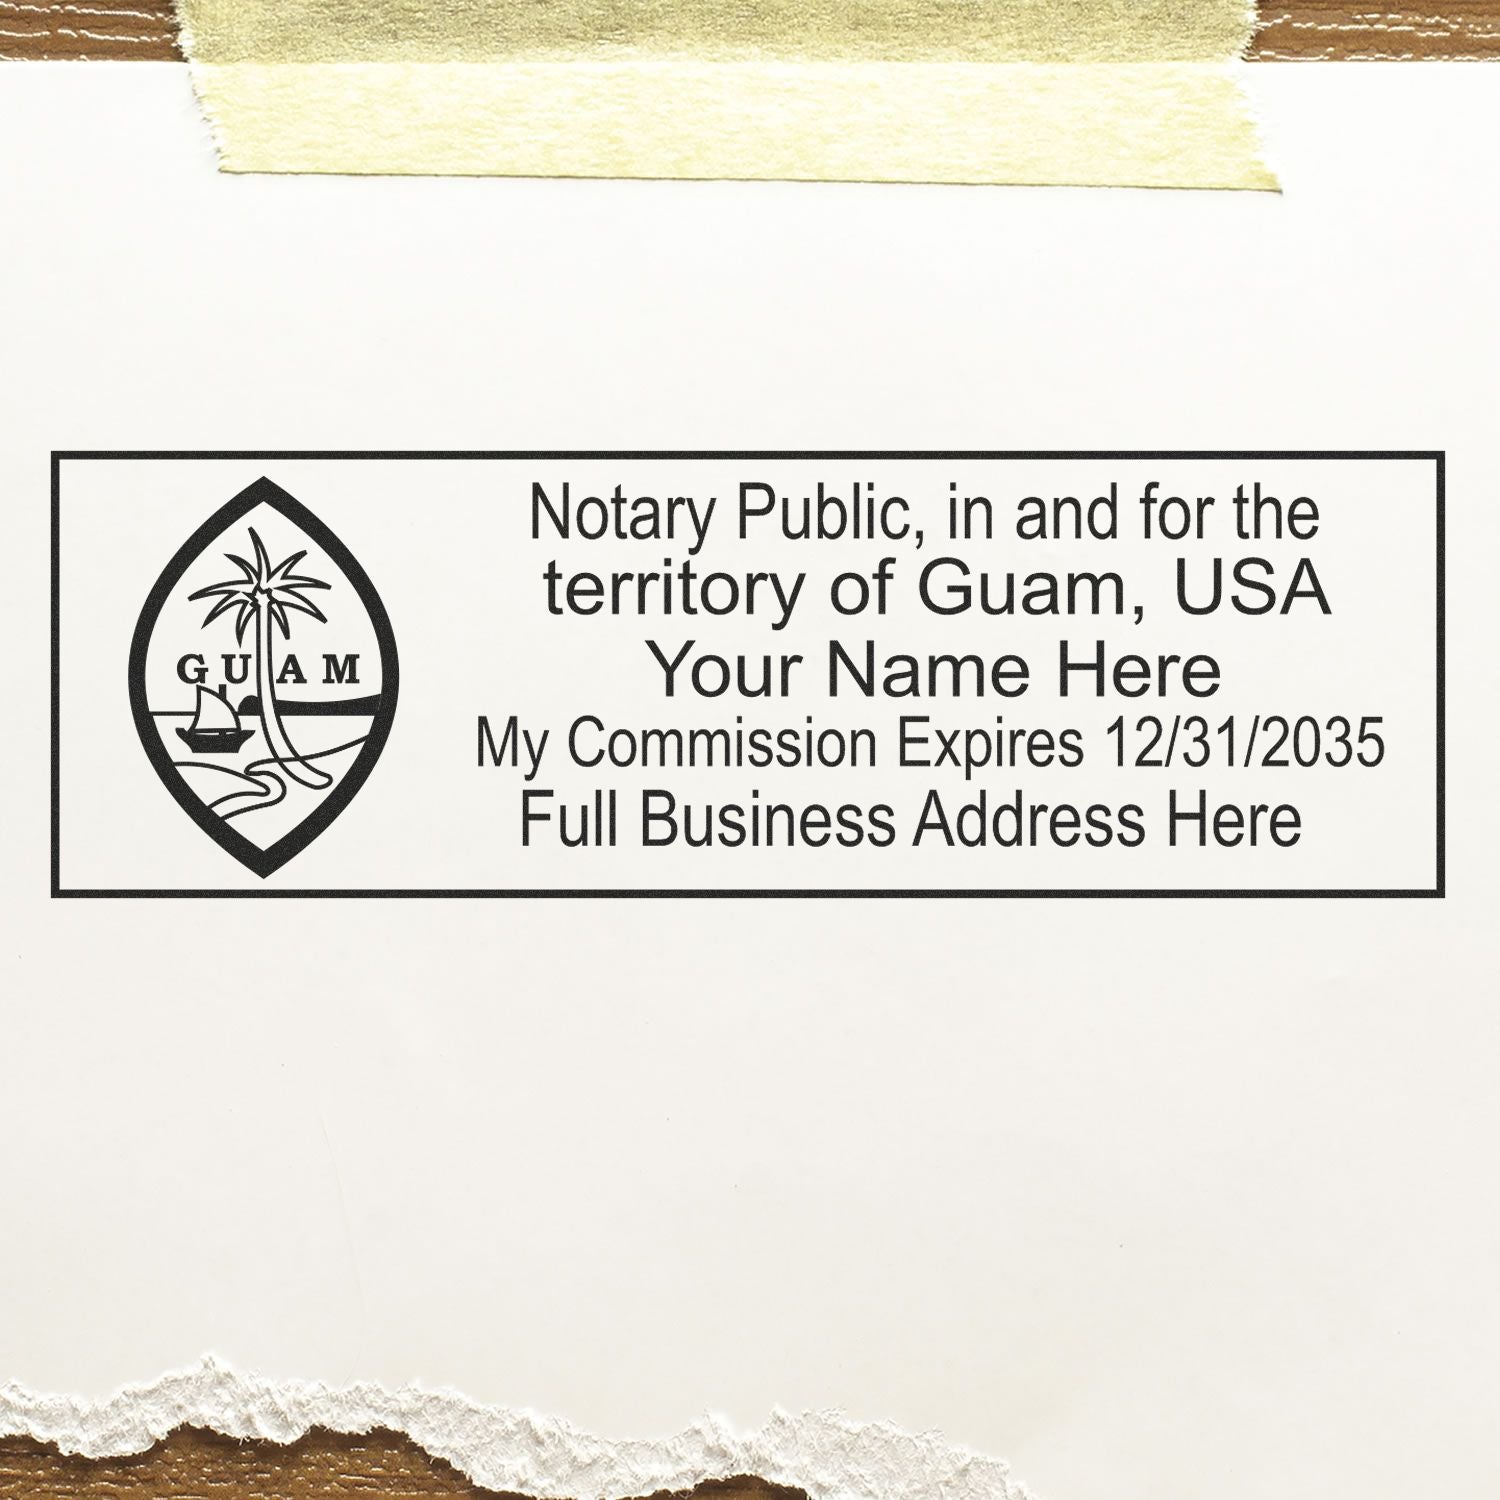 The main image for the Wooden Handle Guam Rectangular Notary Public Stamp depicting a sample of the imprint and electronic files